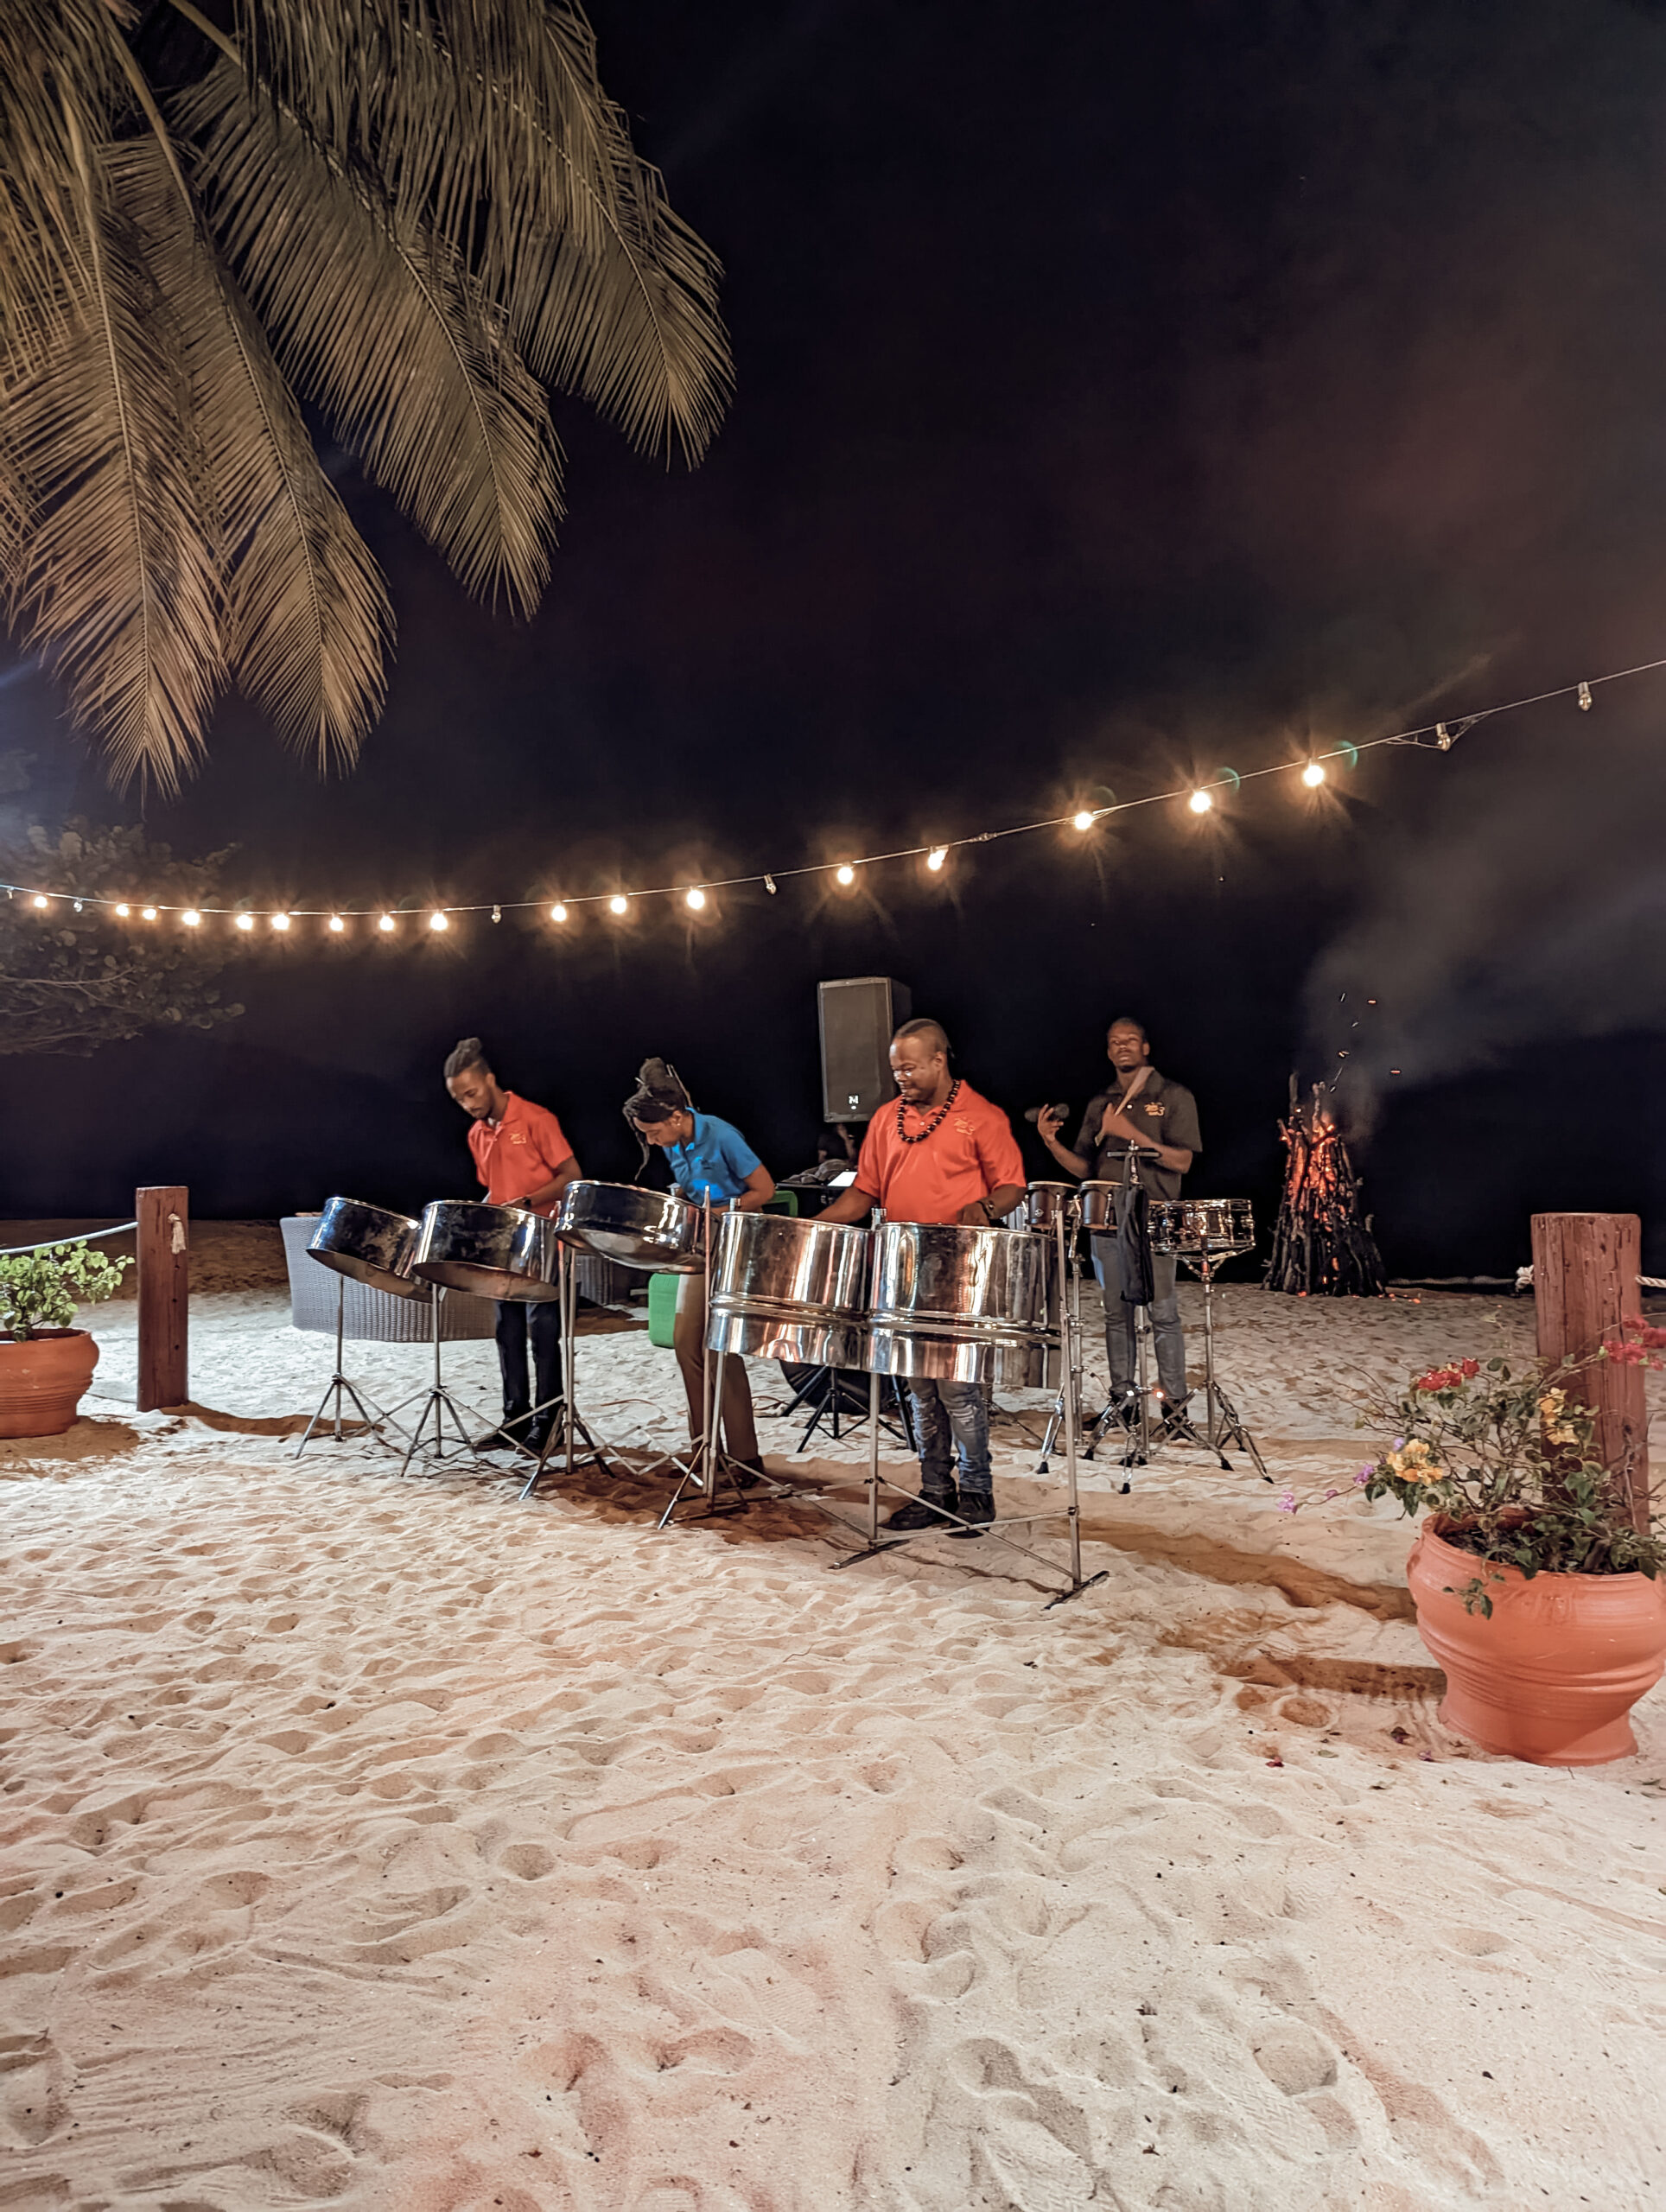 Wedding planner Ella Hartig shows a Steel drum band plays on the beach at a Caribbean event